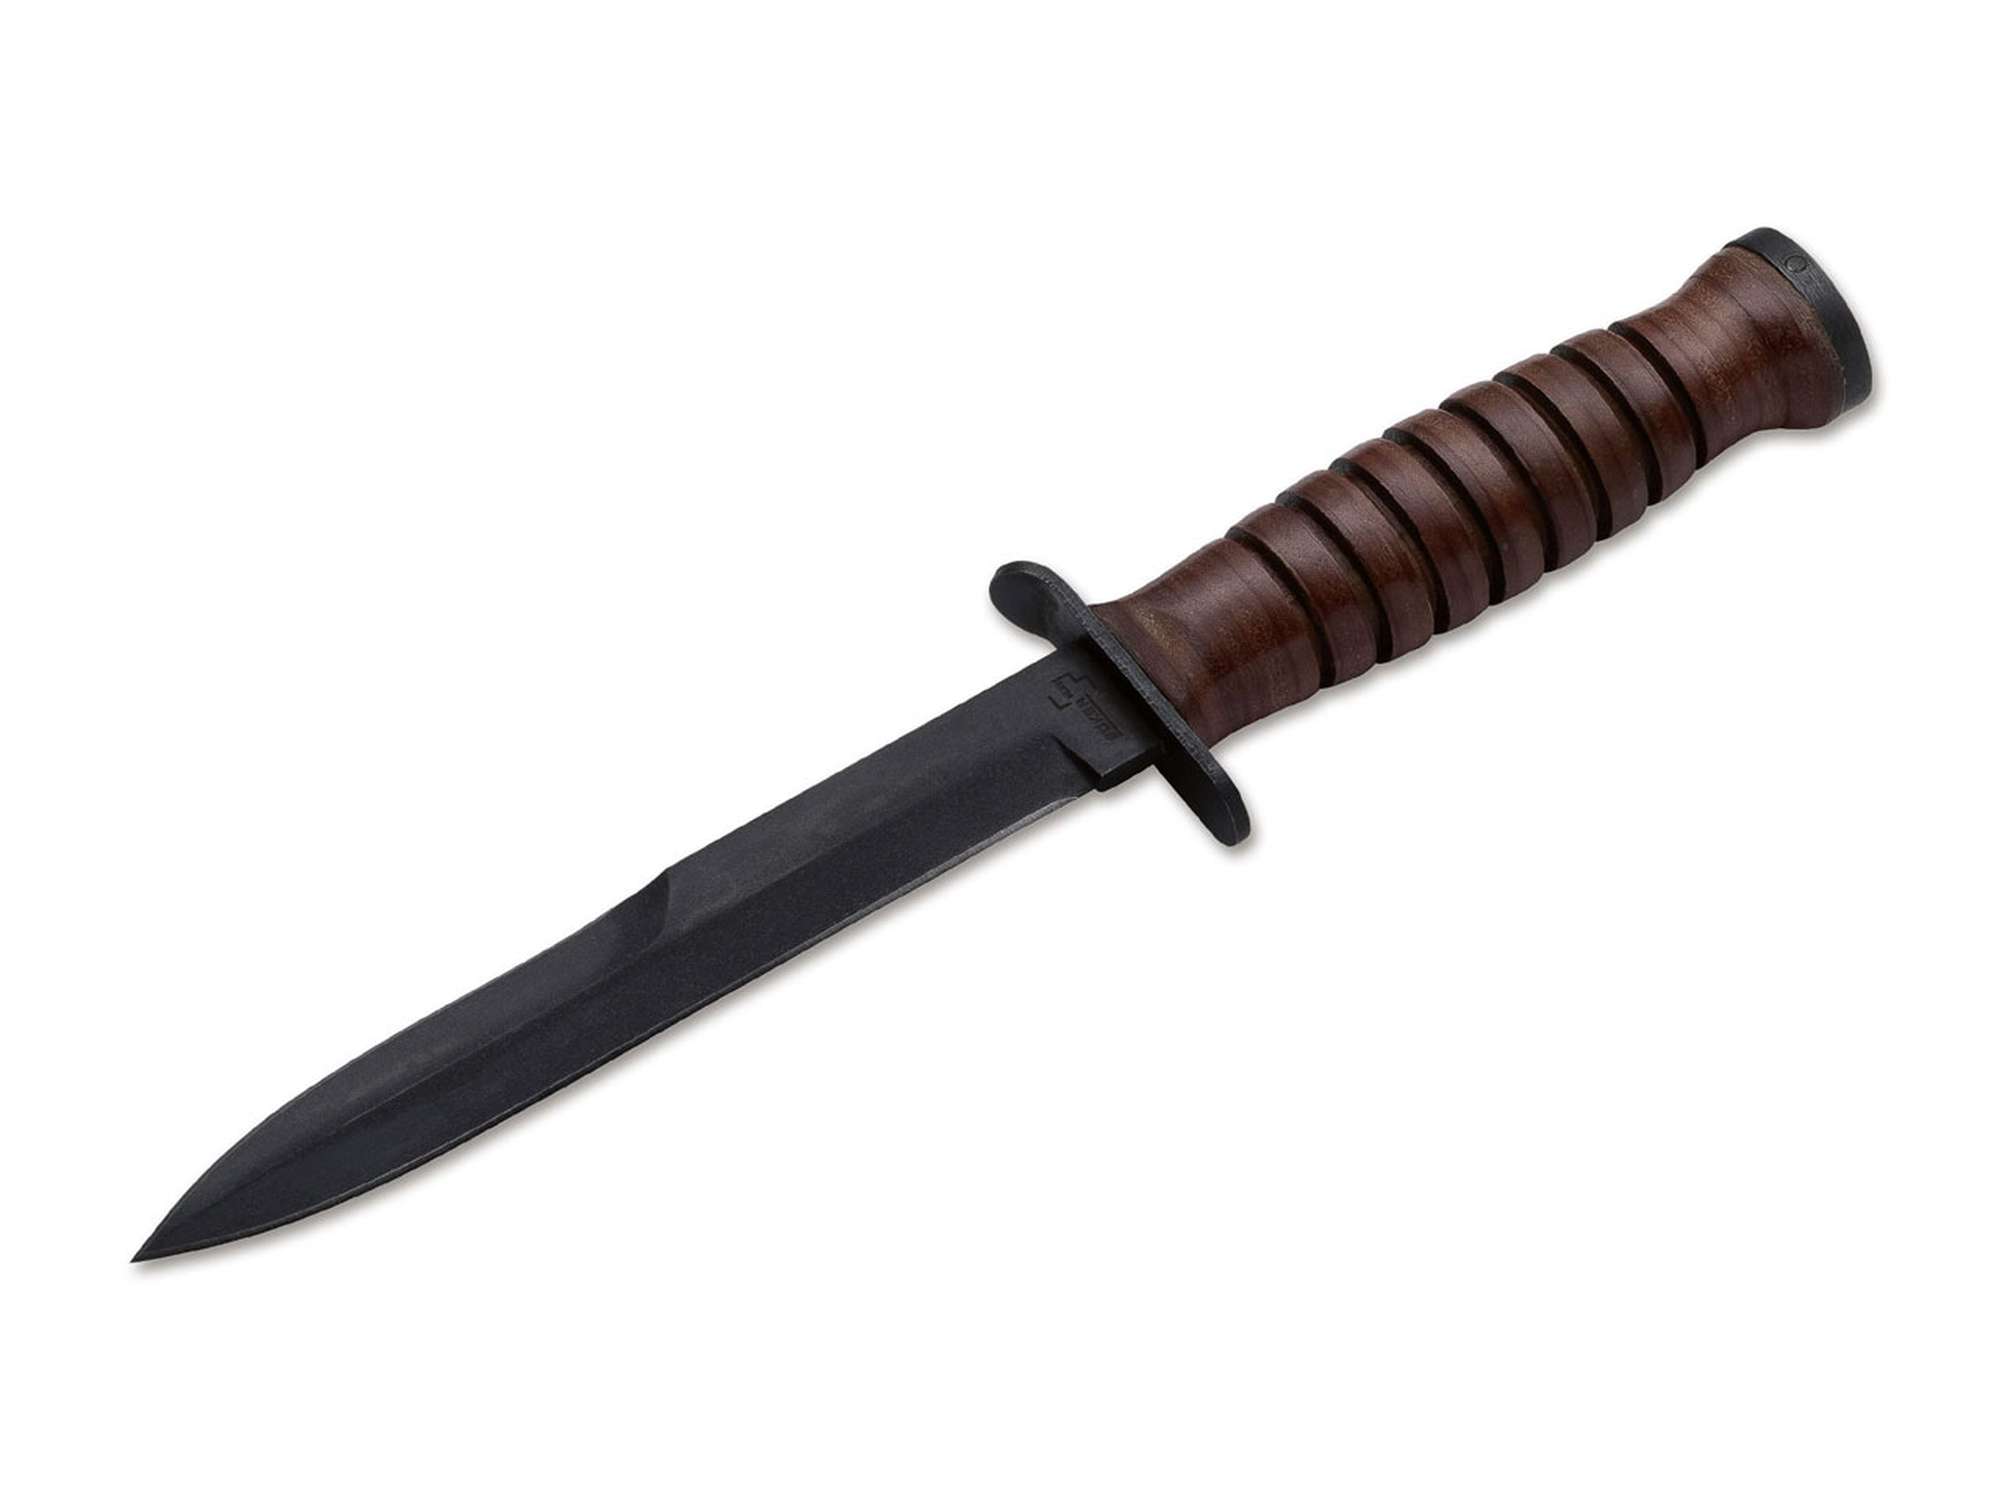 M3 Trench Knife 2.1